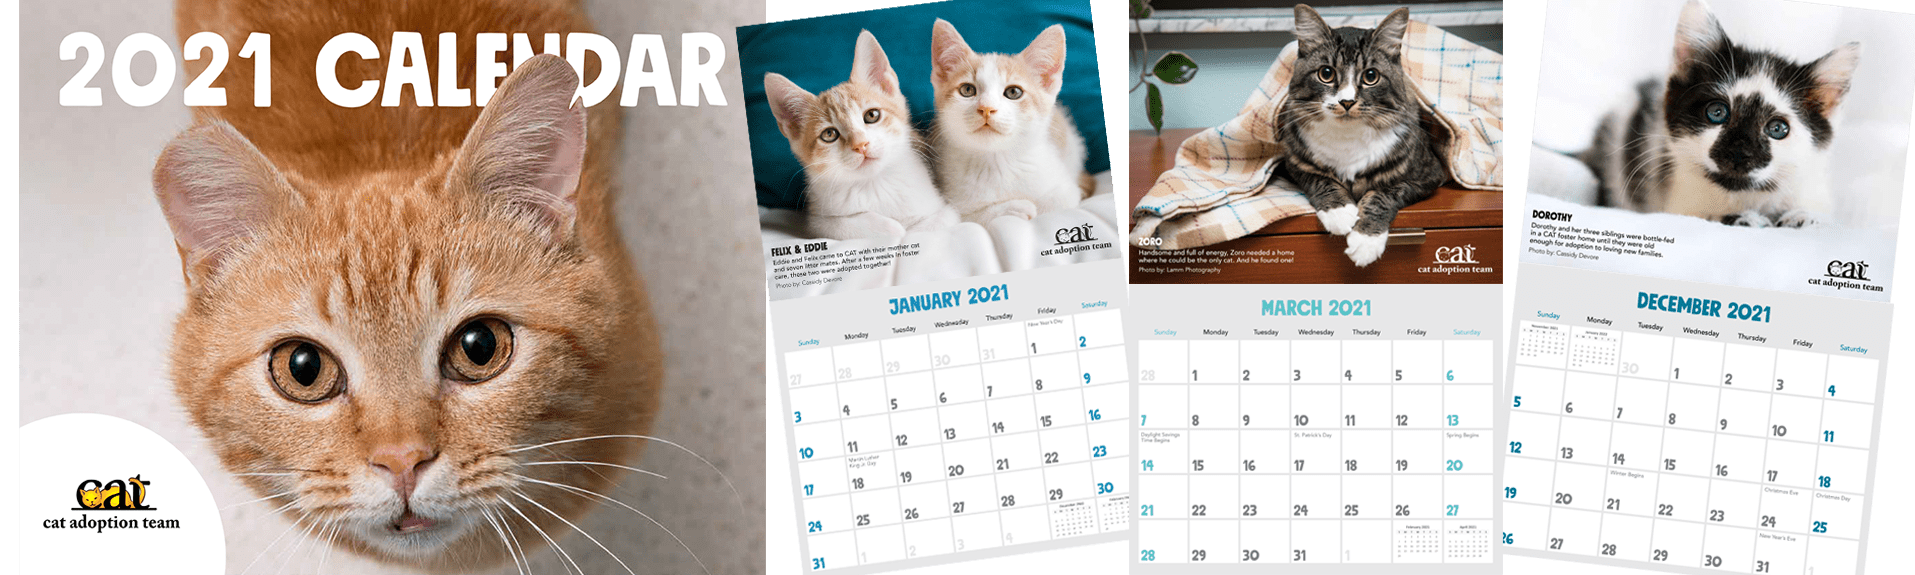 Nice daily quote calendar 2021 Cat 31st edition Nyan 